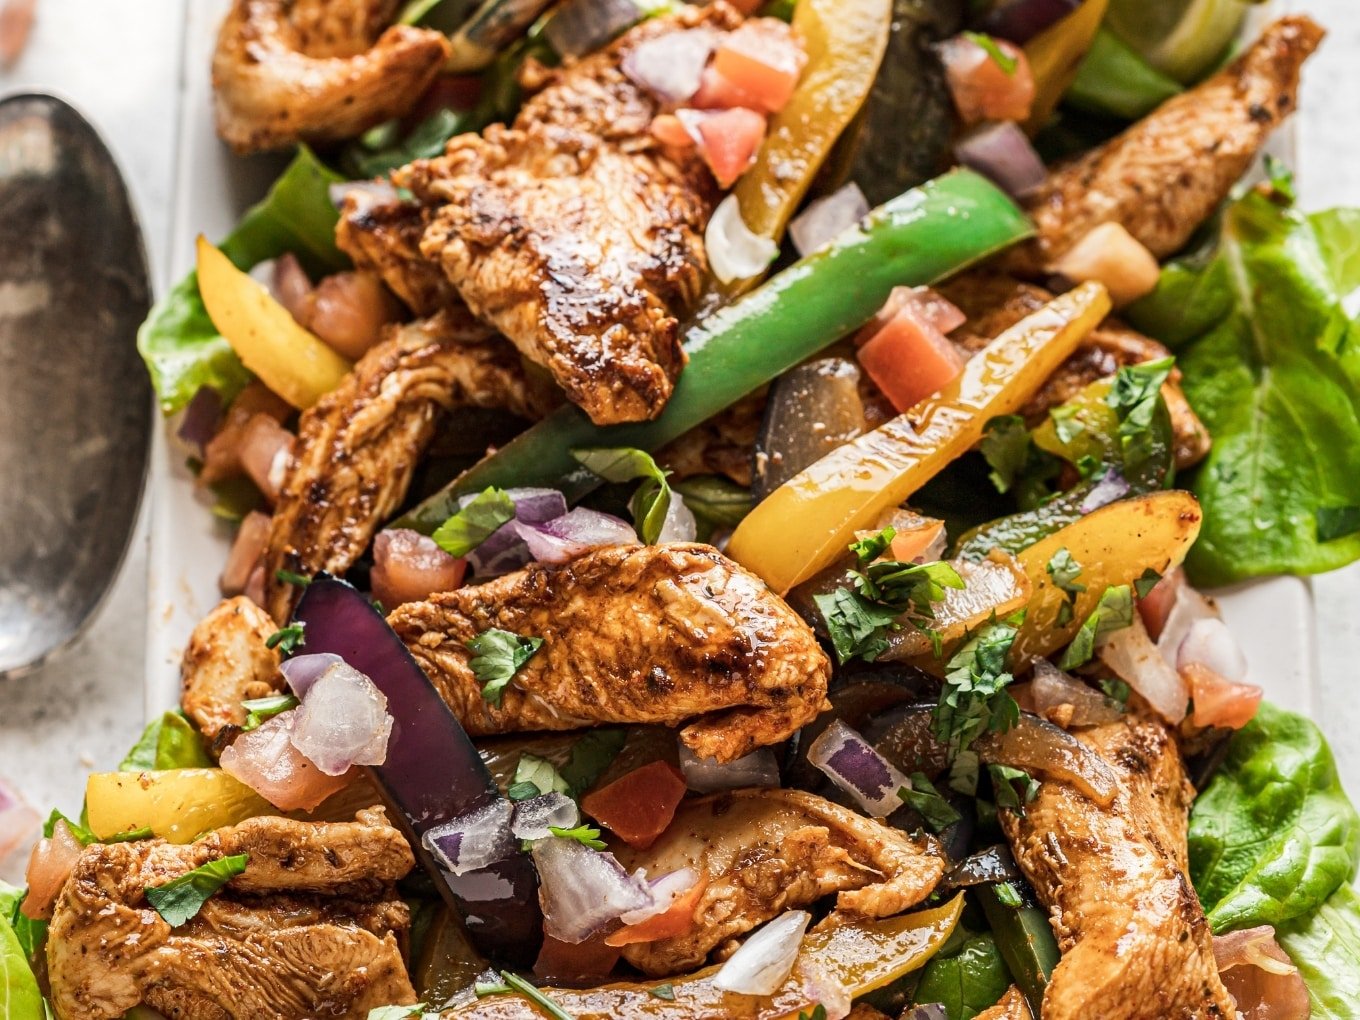 https://thewholecook.com/wp-content/uploads/2018/01/Skillet-Chicken-Fajitas-by-The-Whole-Cook-horizontal1-1.jpg